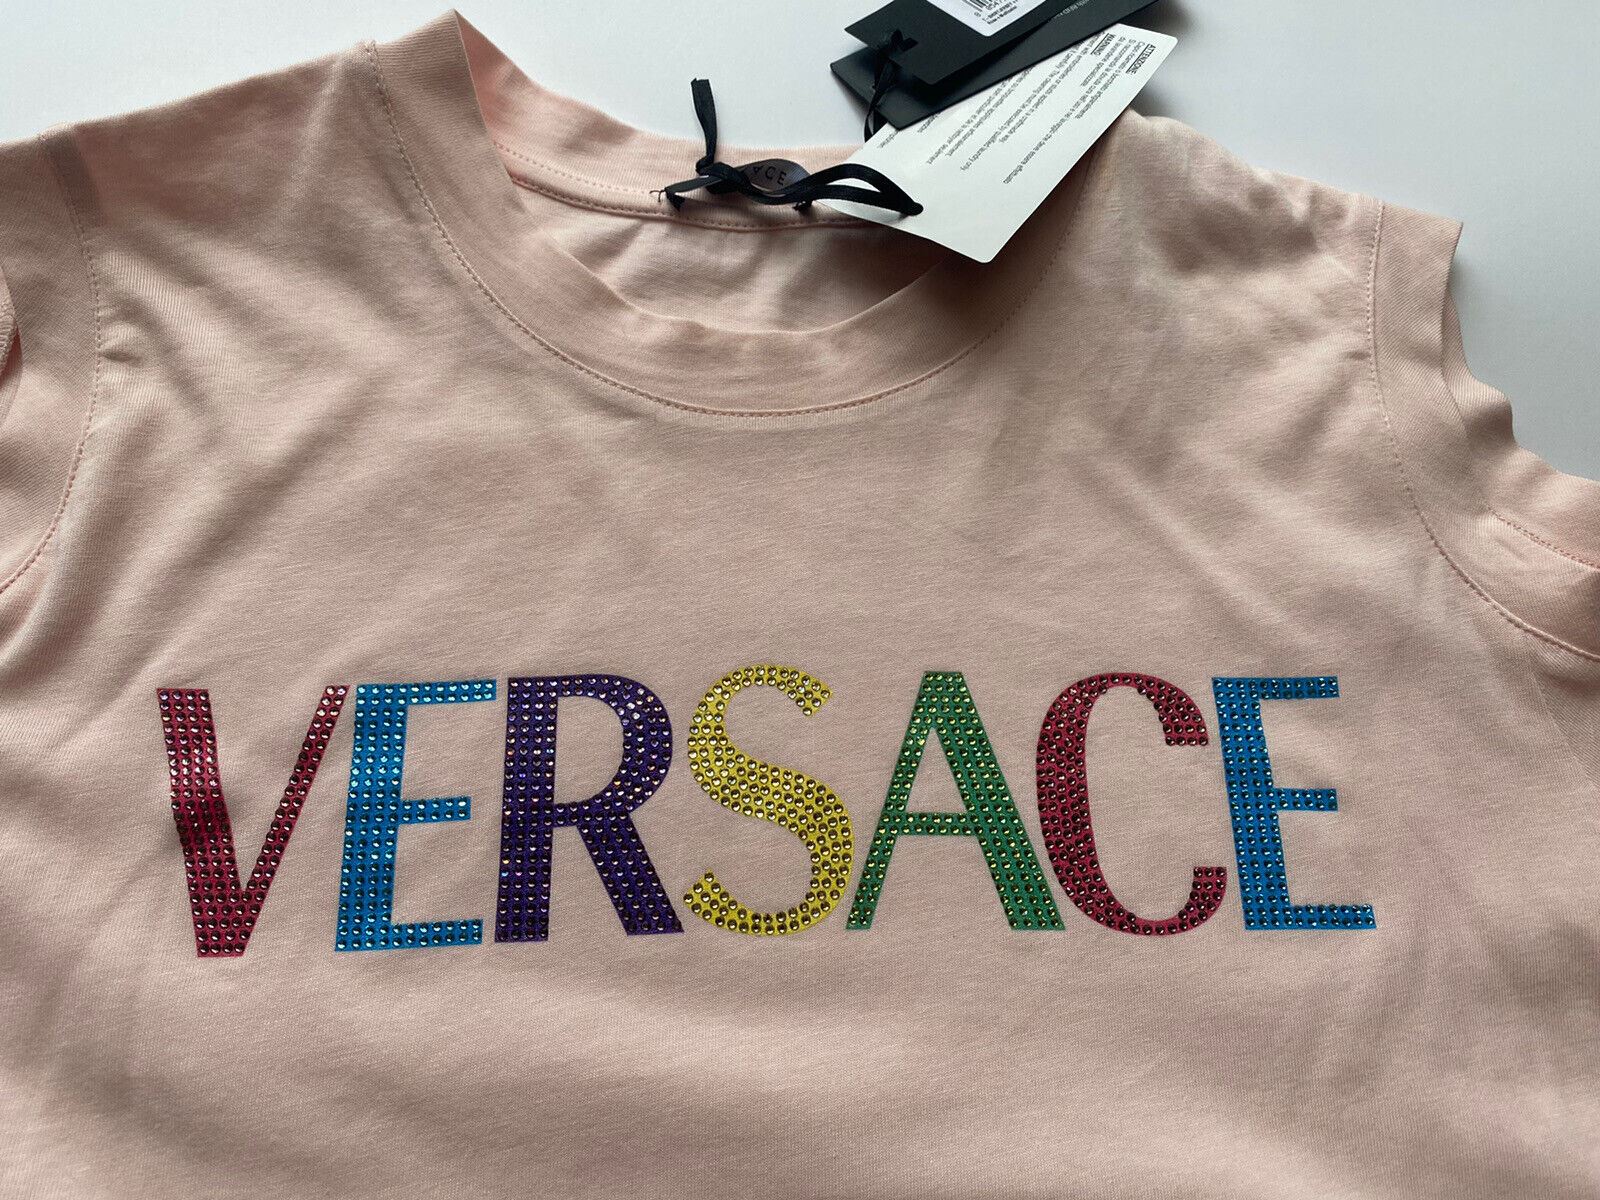 NWT Versace Women's Embroidery Logo Rose Jersey T-Shirt 10 US (44 Euro) 1004970